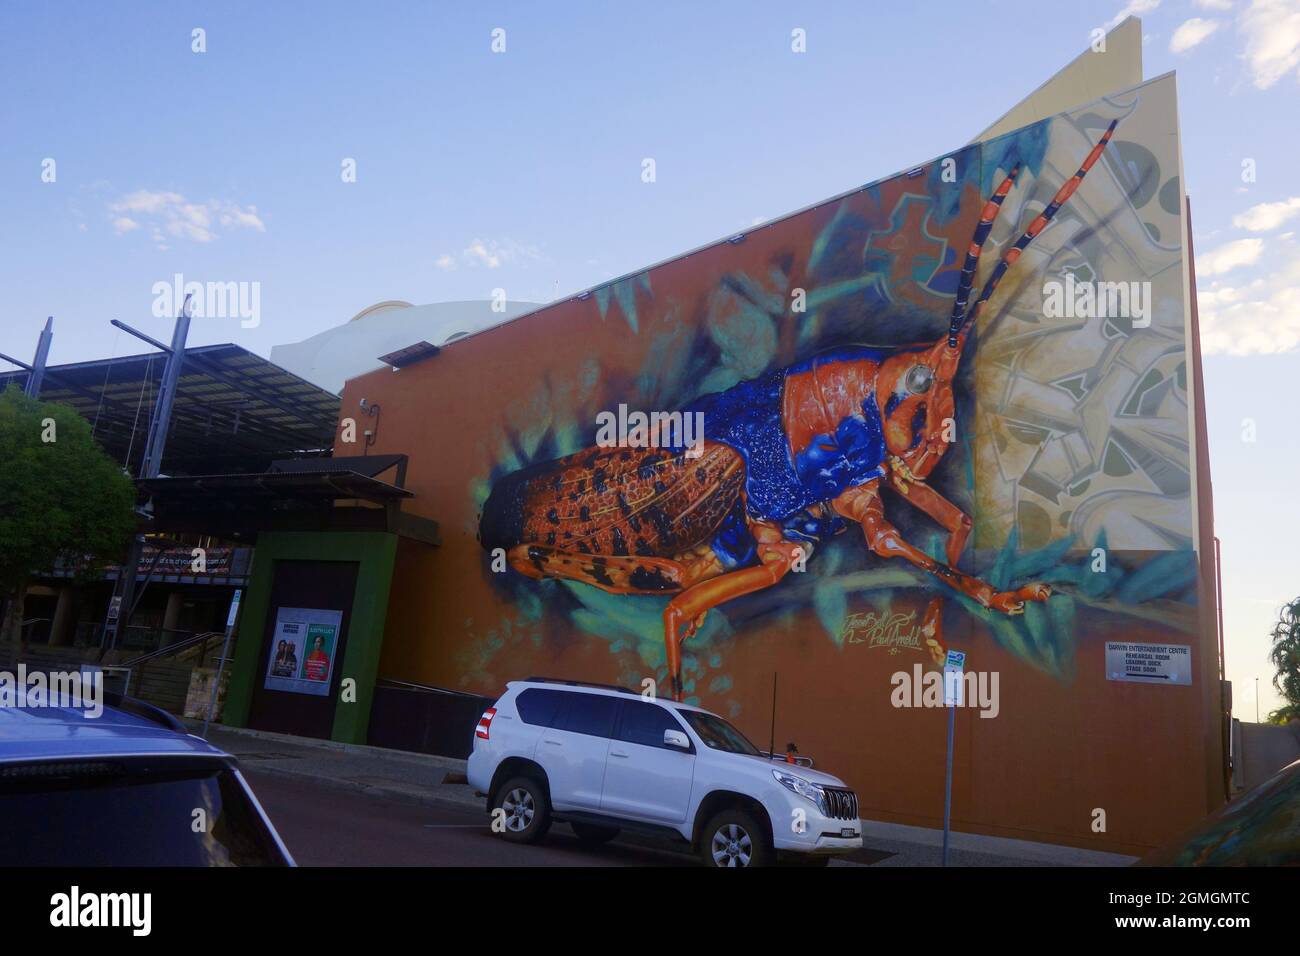 Spectacular mural of Leichhardt's grasshopper (by Paul Arnold and Jesse Belle) on Darwin Entertainment Centre wall, Darwin, Northern Territory, Austra Stock Photo